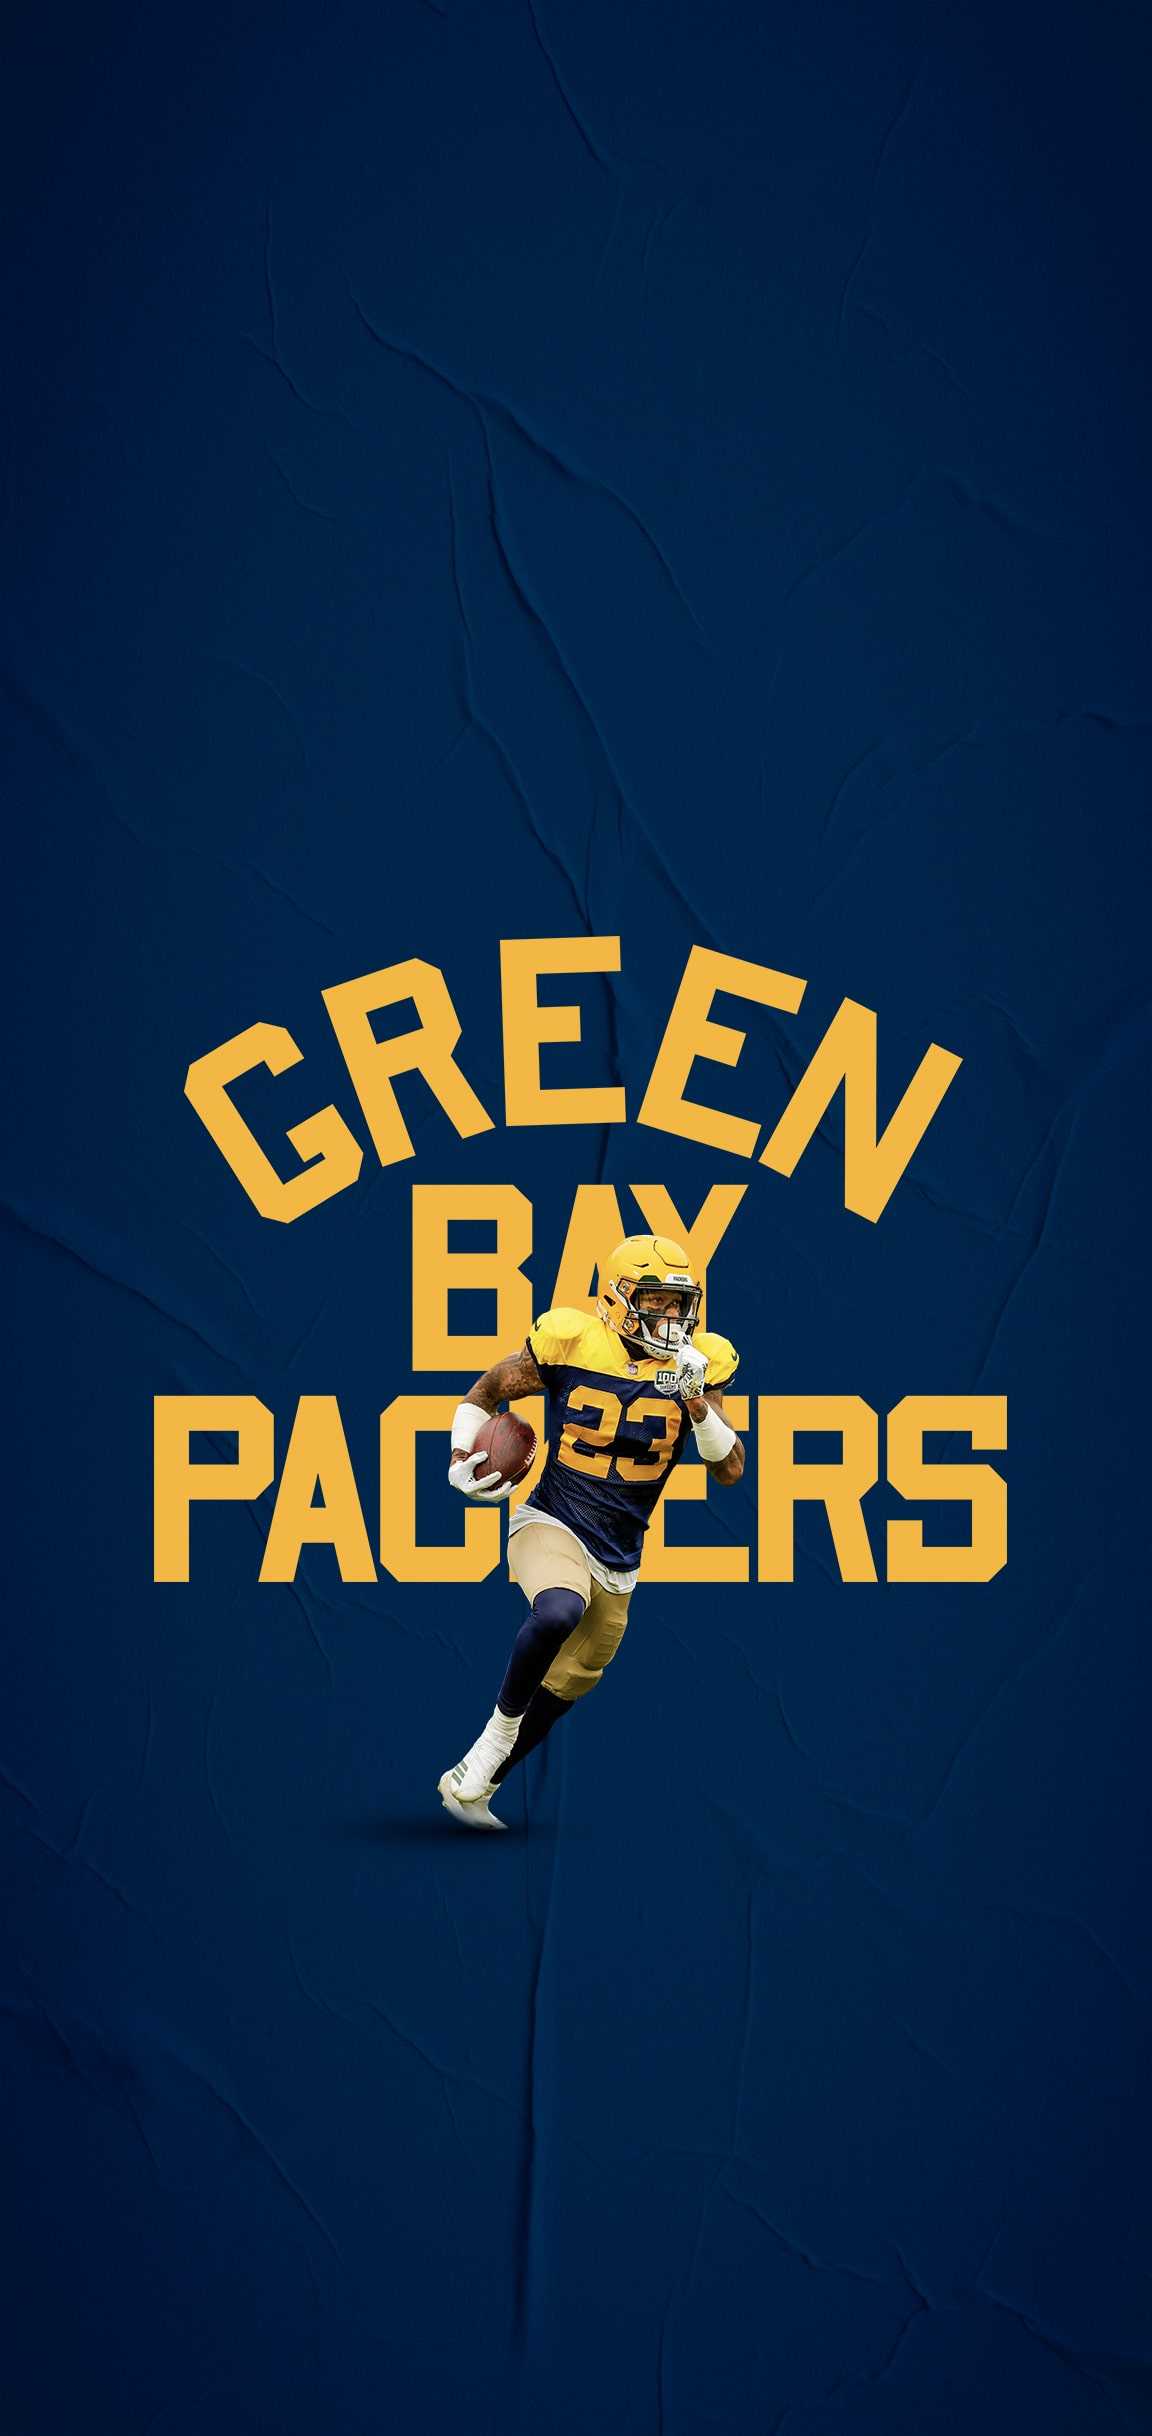 Green Bay Packers Wallpaper Kolpaper Awesome Free Hd Wallpapers